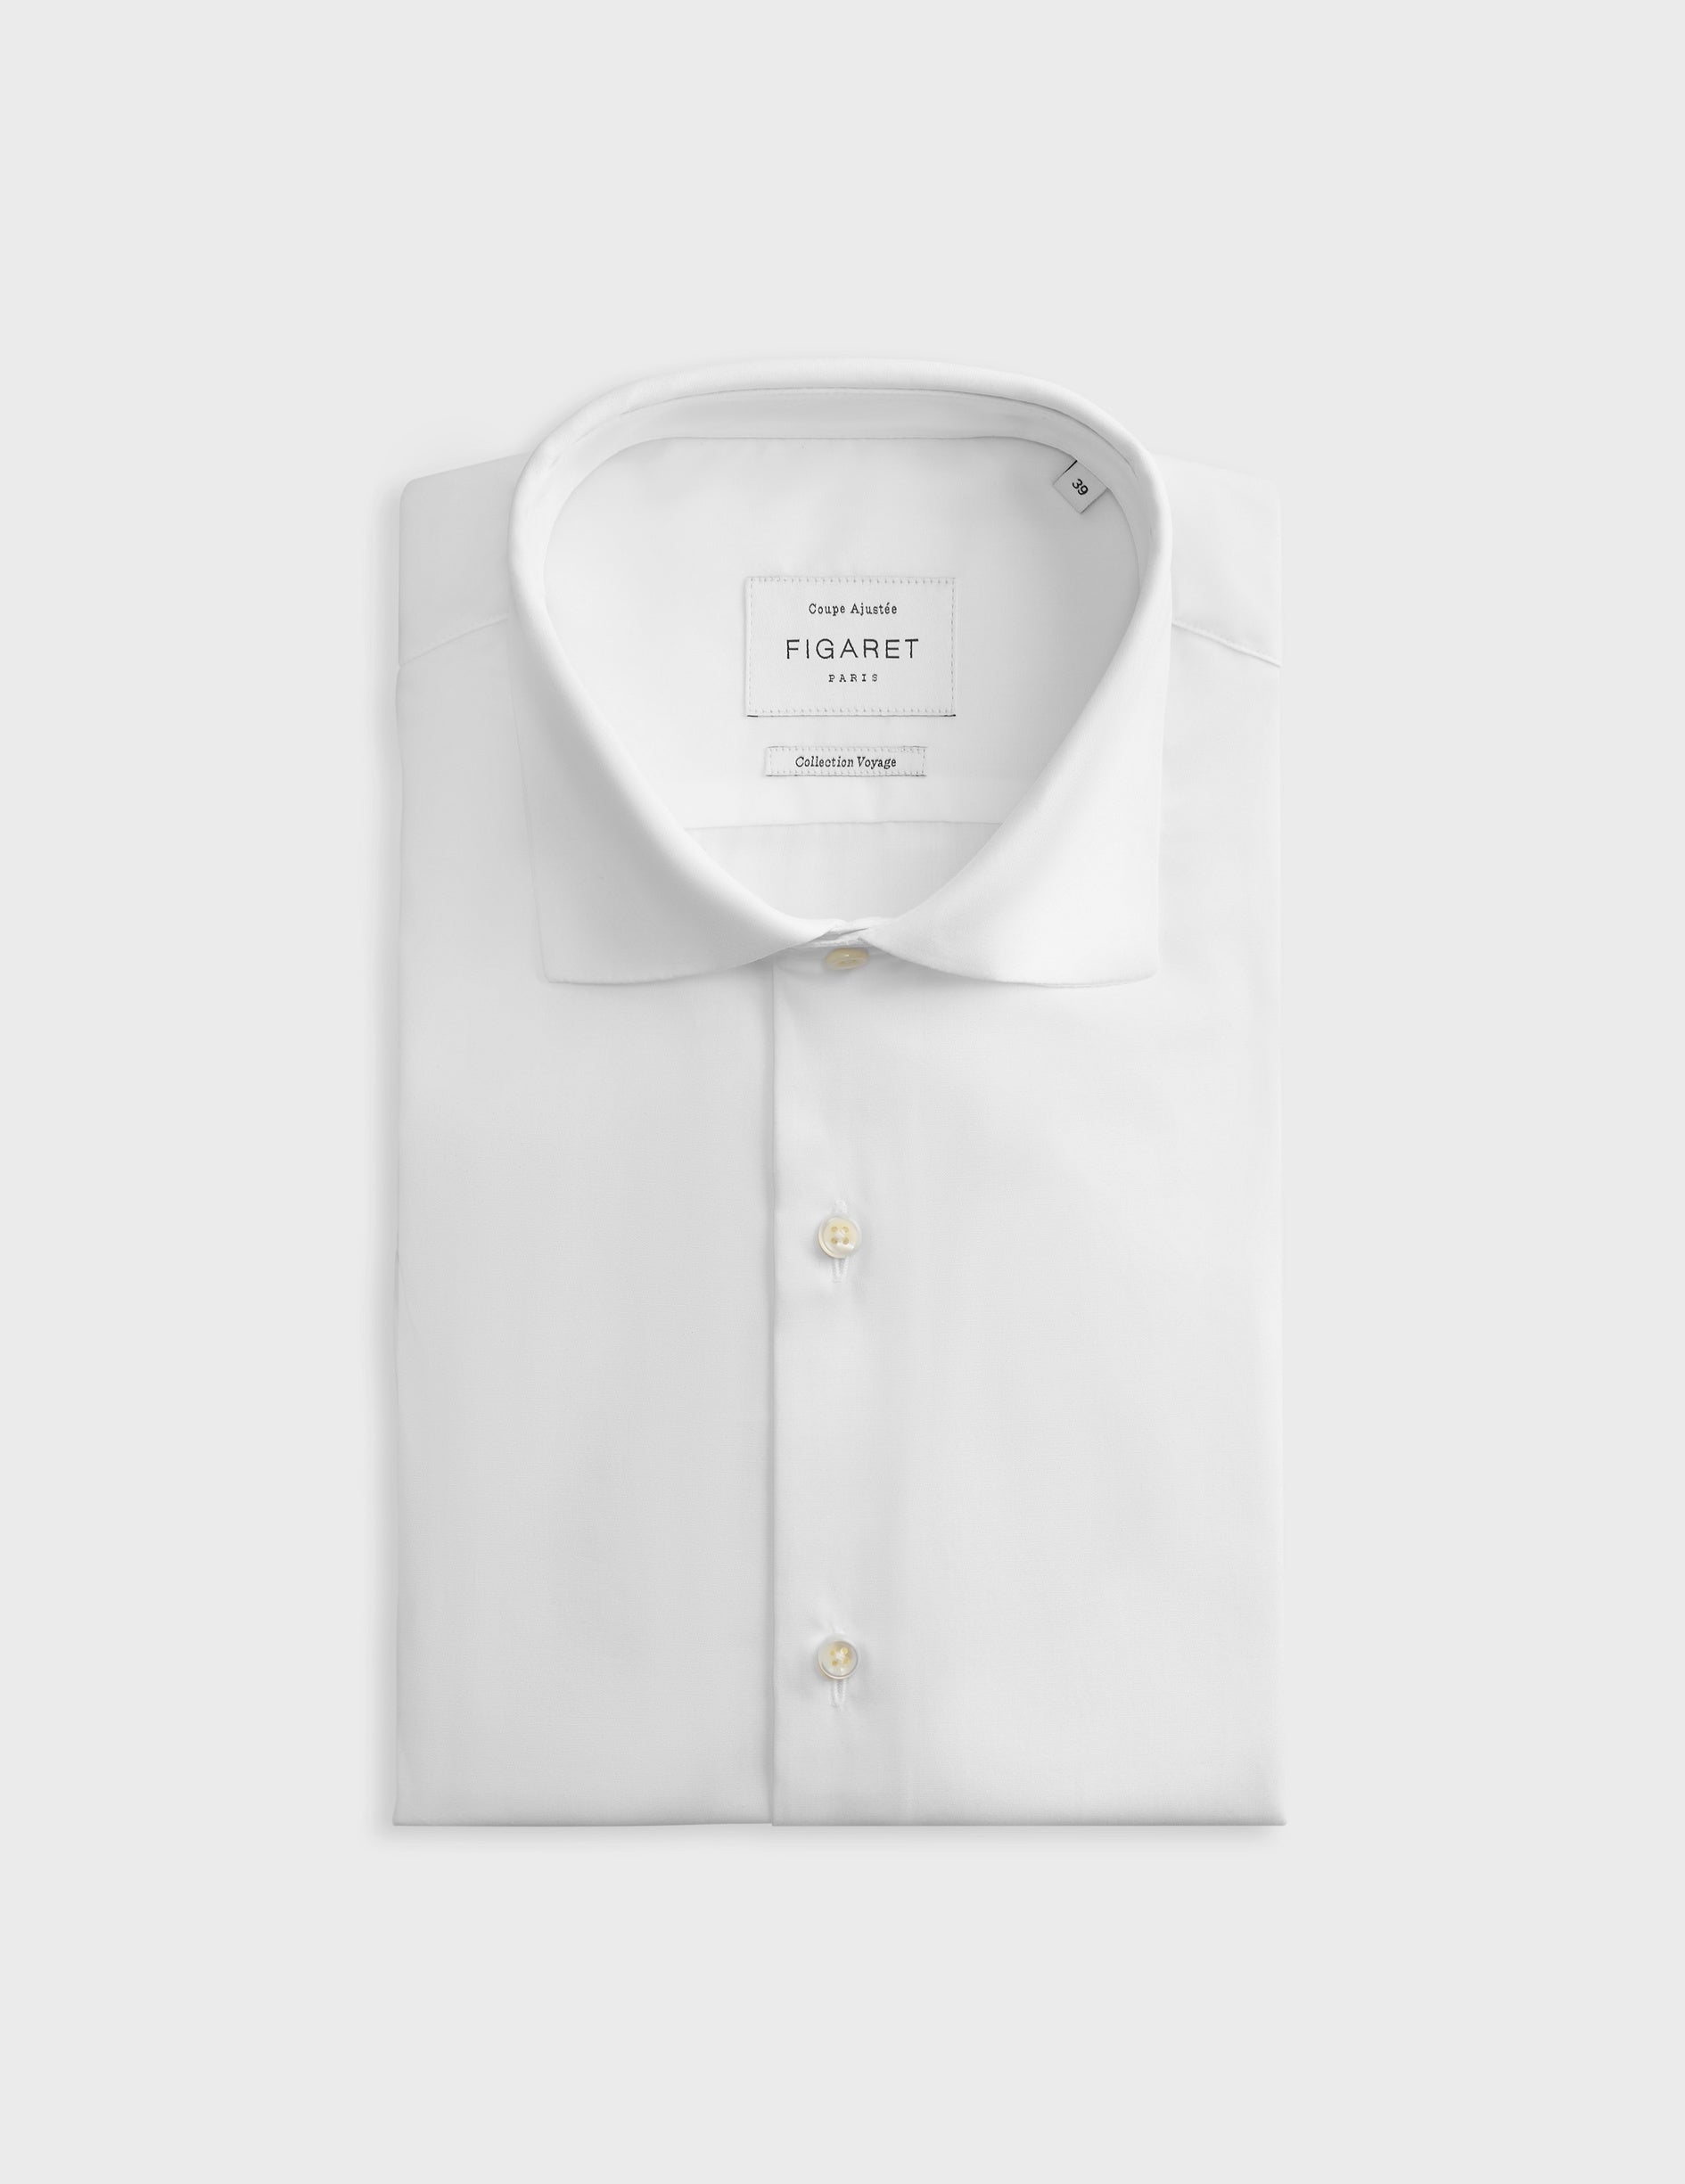 Fitted white wrinkle-free shirt